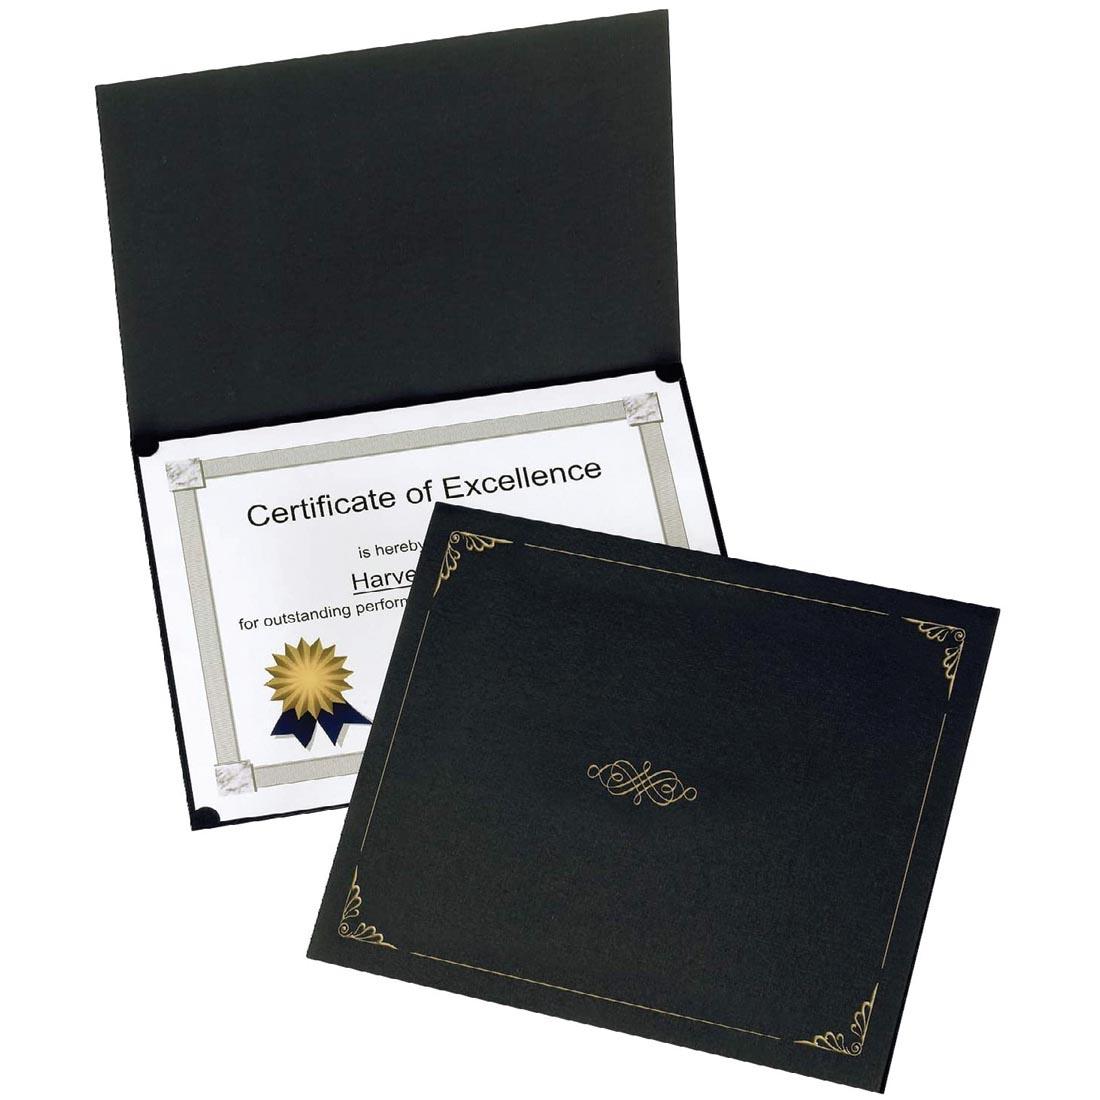 Black Certificate Holder Shown both in use and closed